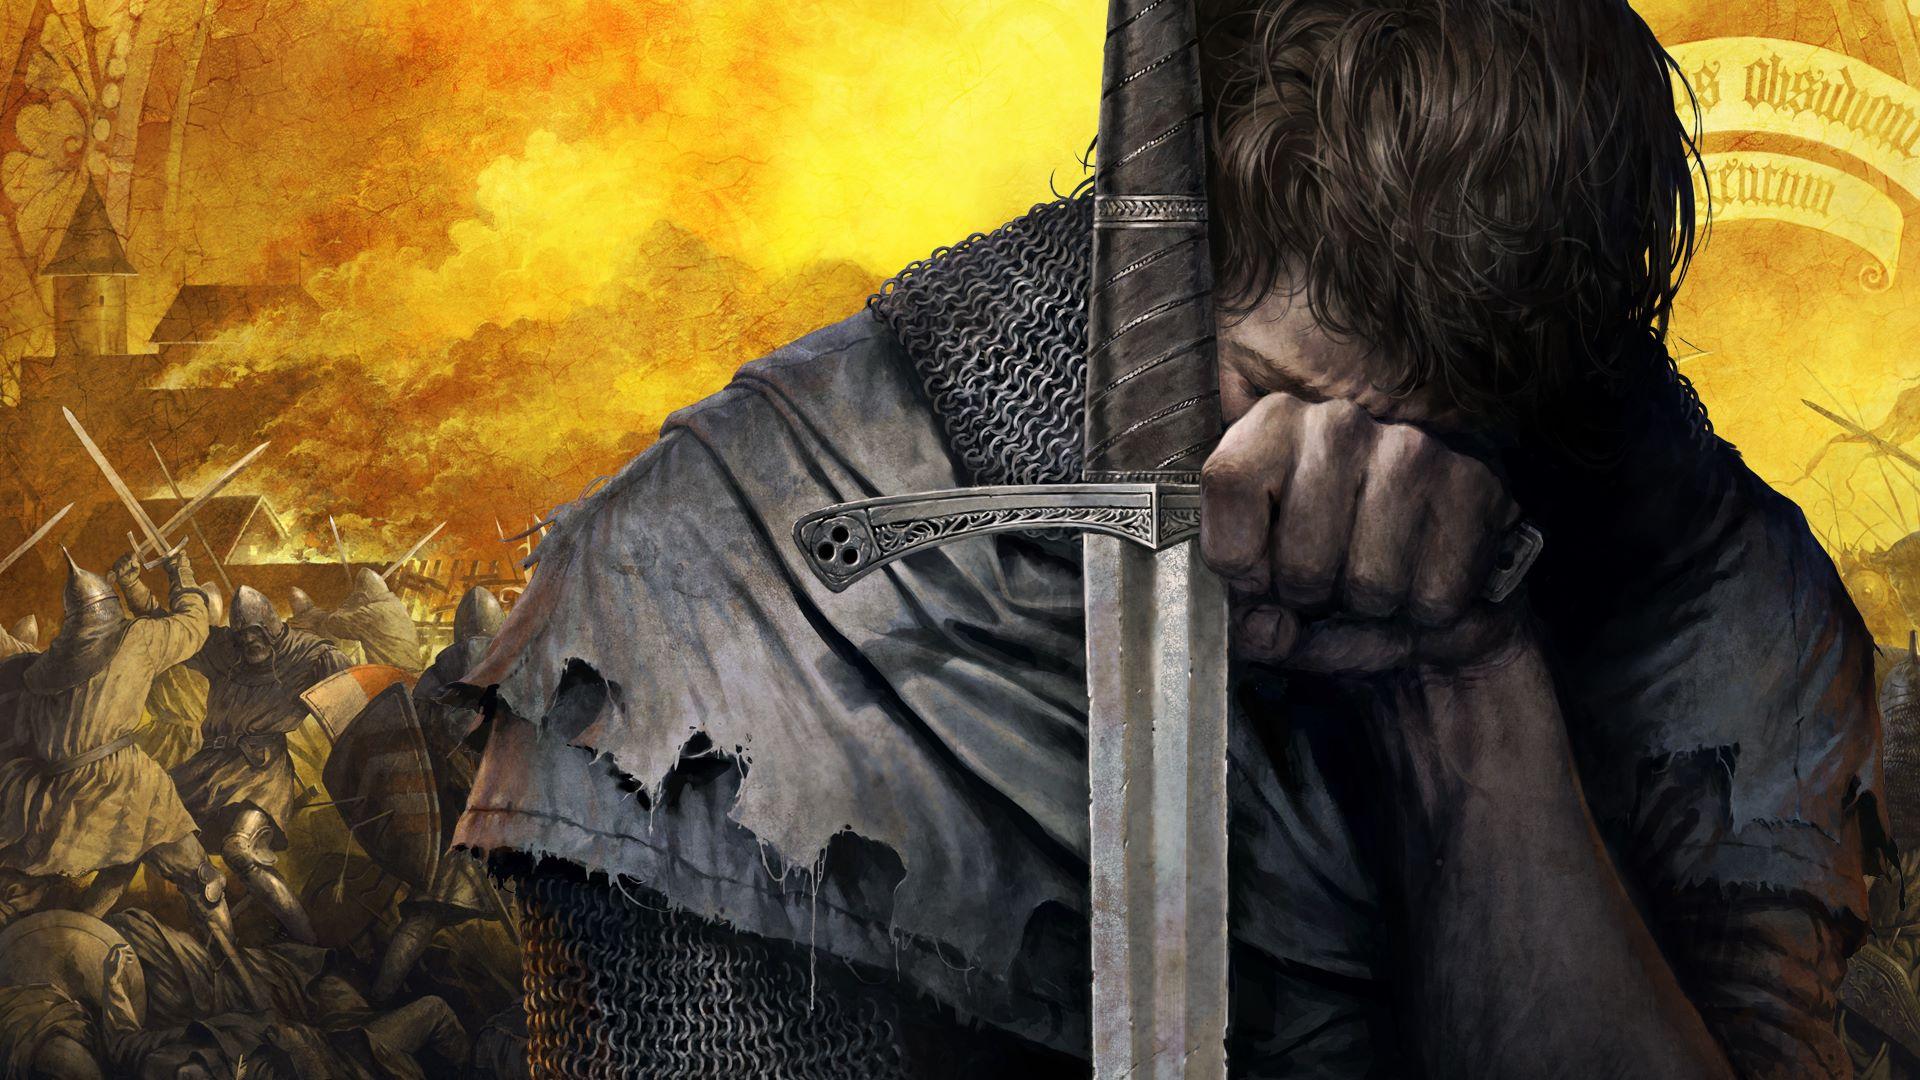 Gritty RPG Kingdom Come: Deliverance Is Getting a Complete Edition